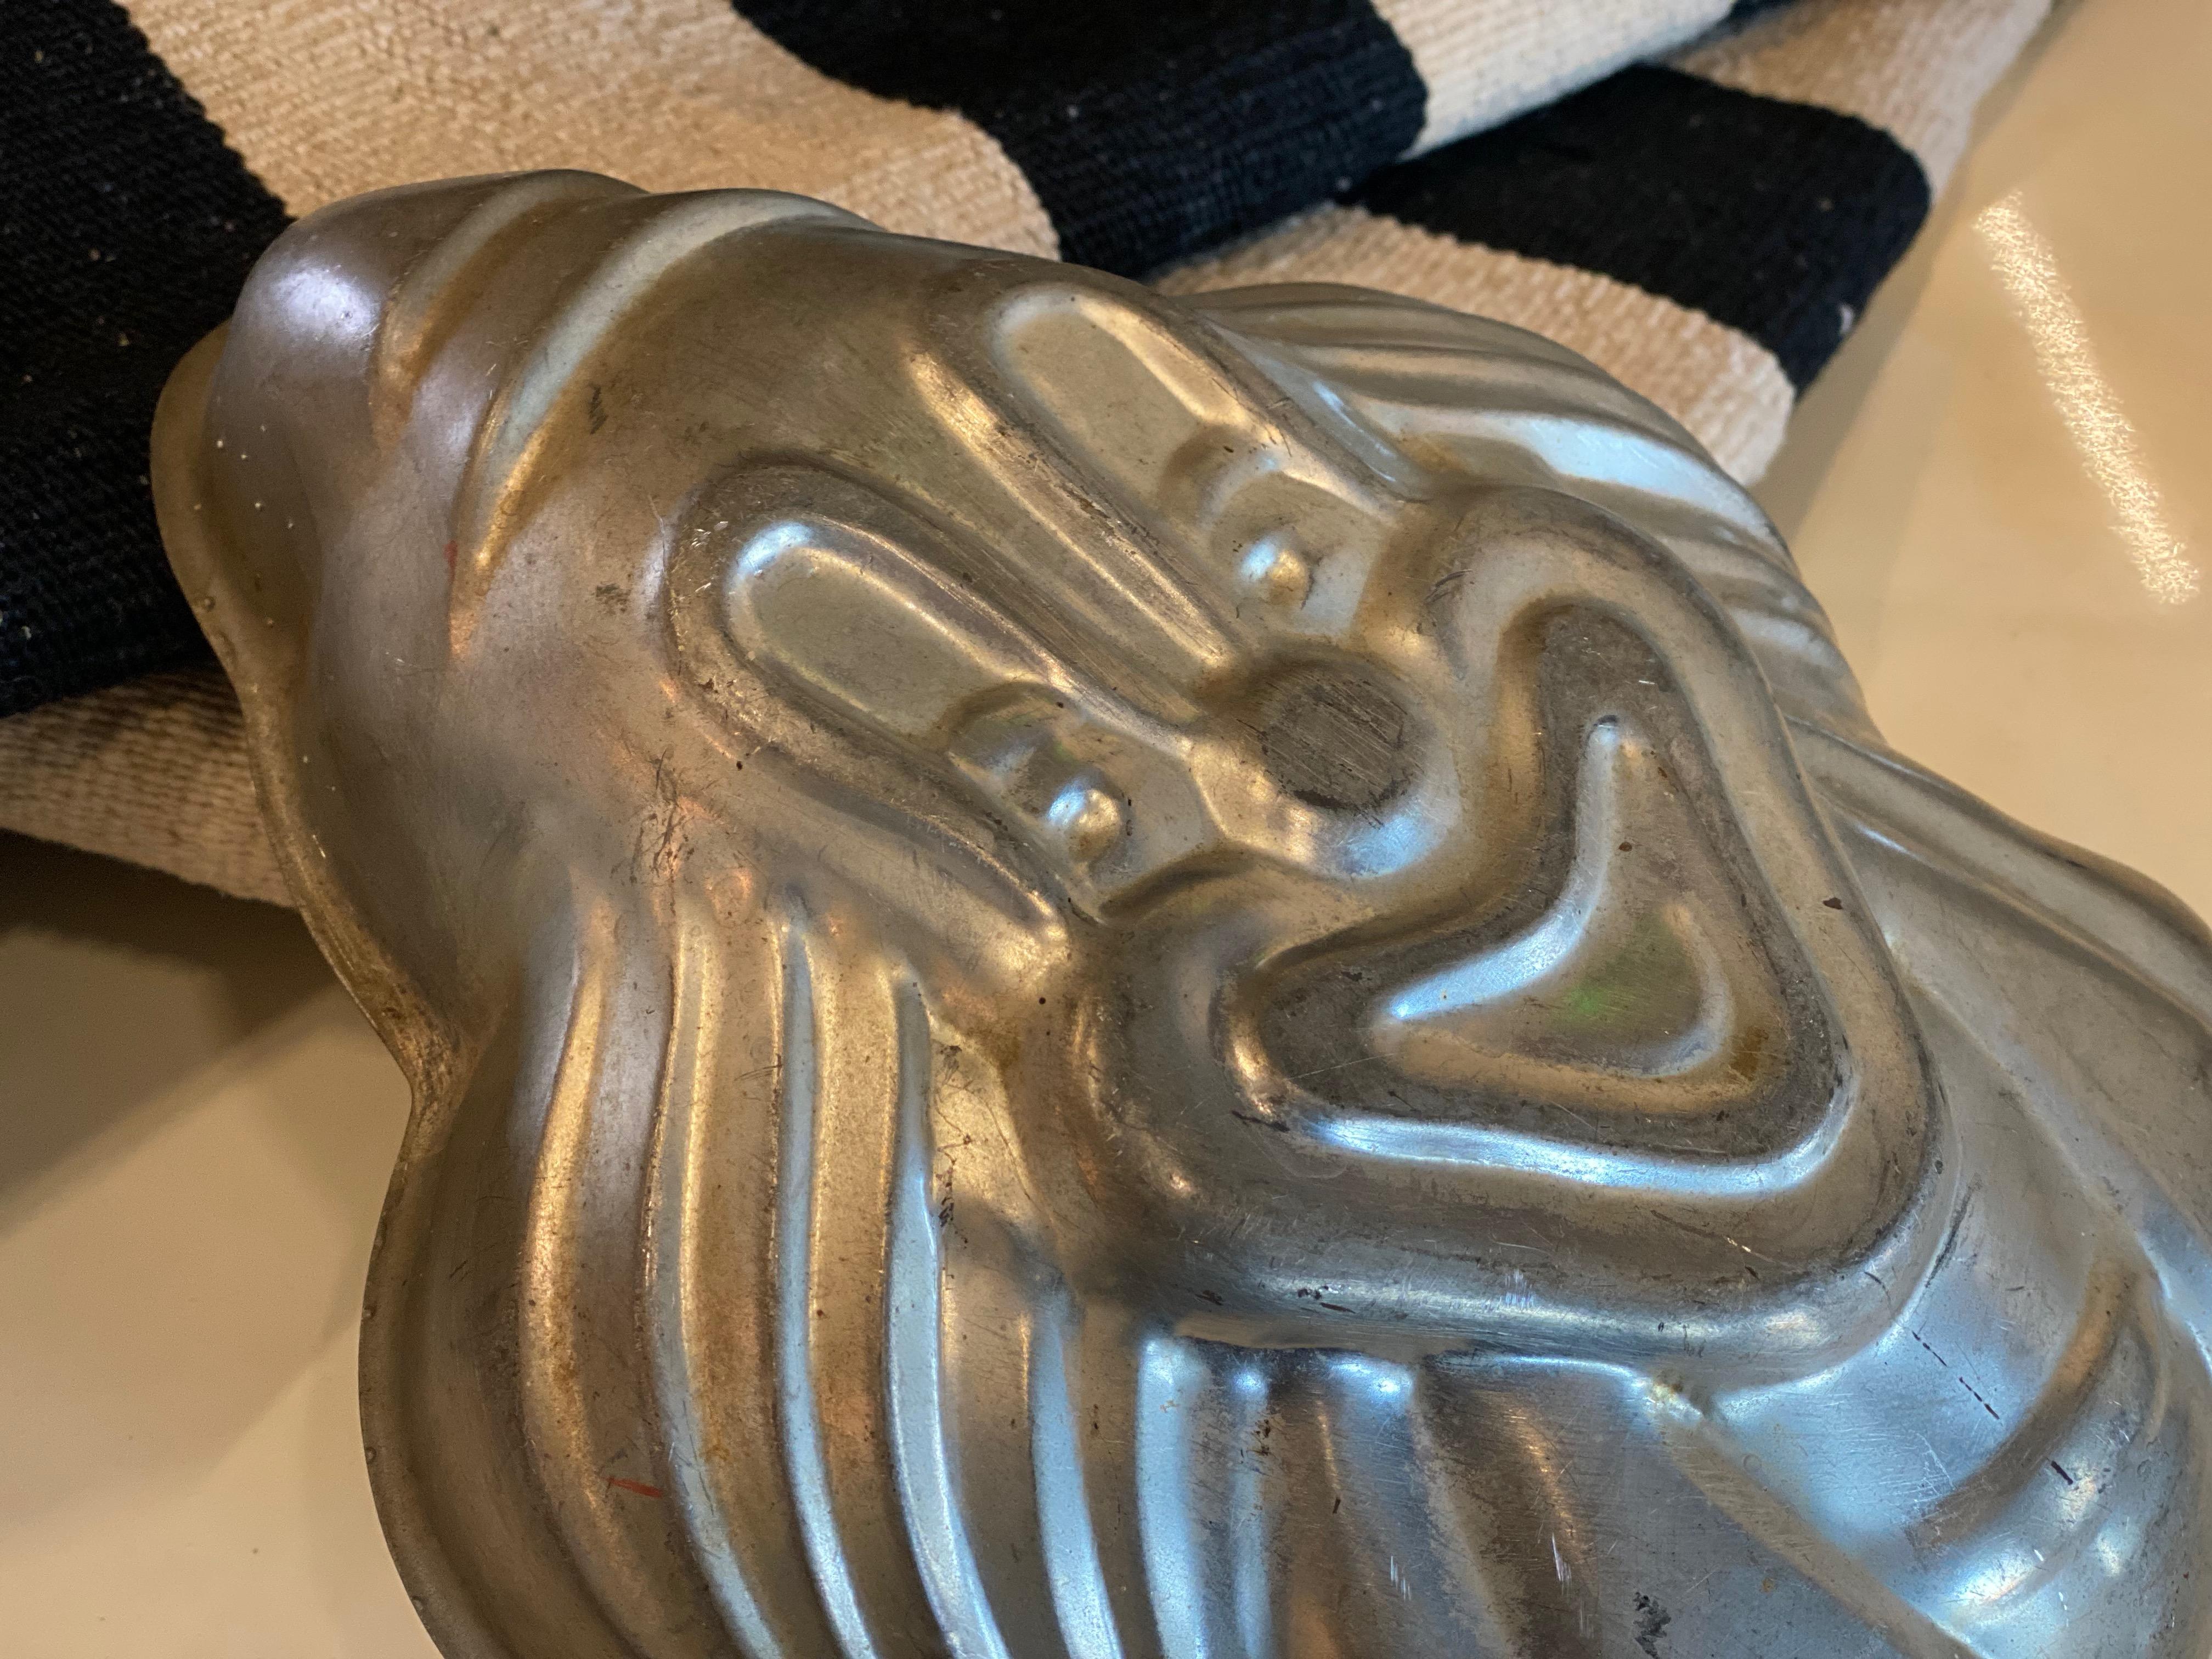 Decorative baking dish with clown face as a motif. This particular baking utensil is from the years between the mid and late 20th century. The mold comes from France and is made of tin with a beautiful patina. Makes a nice hanging wall decoration in